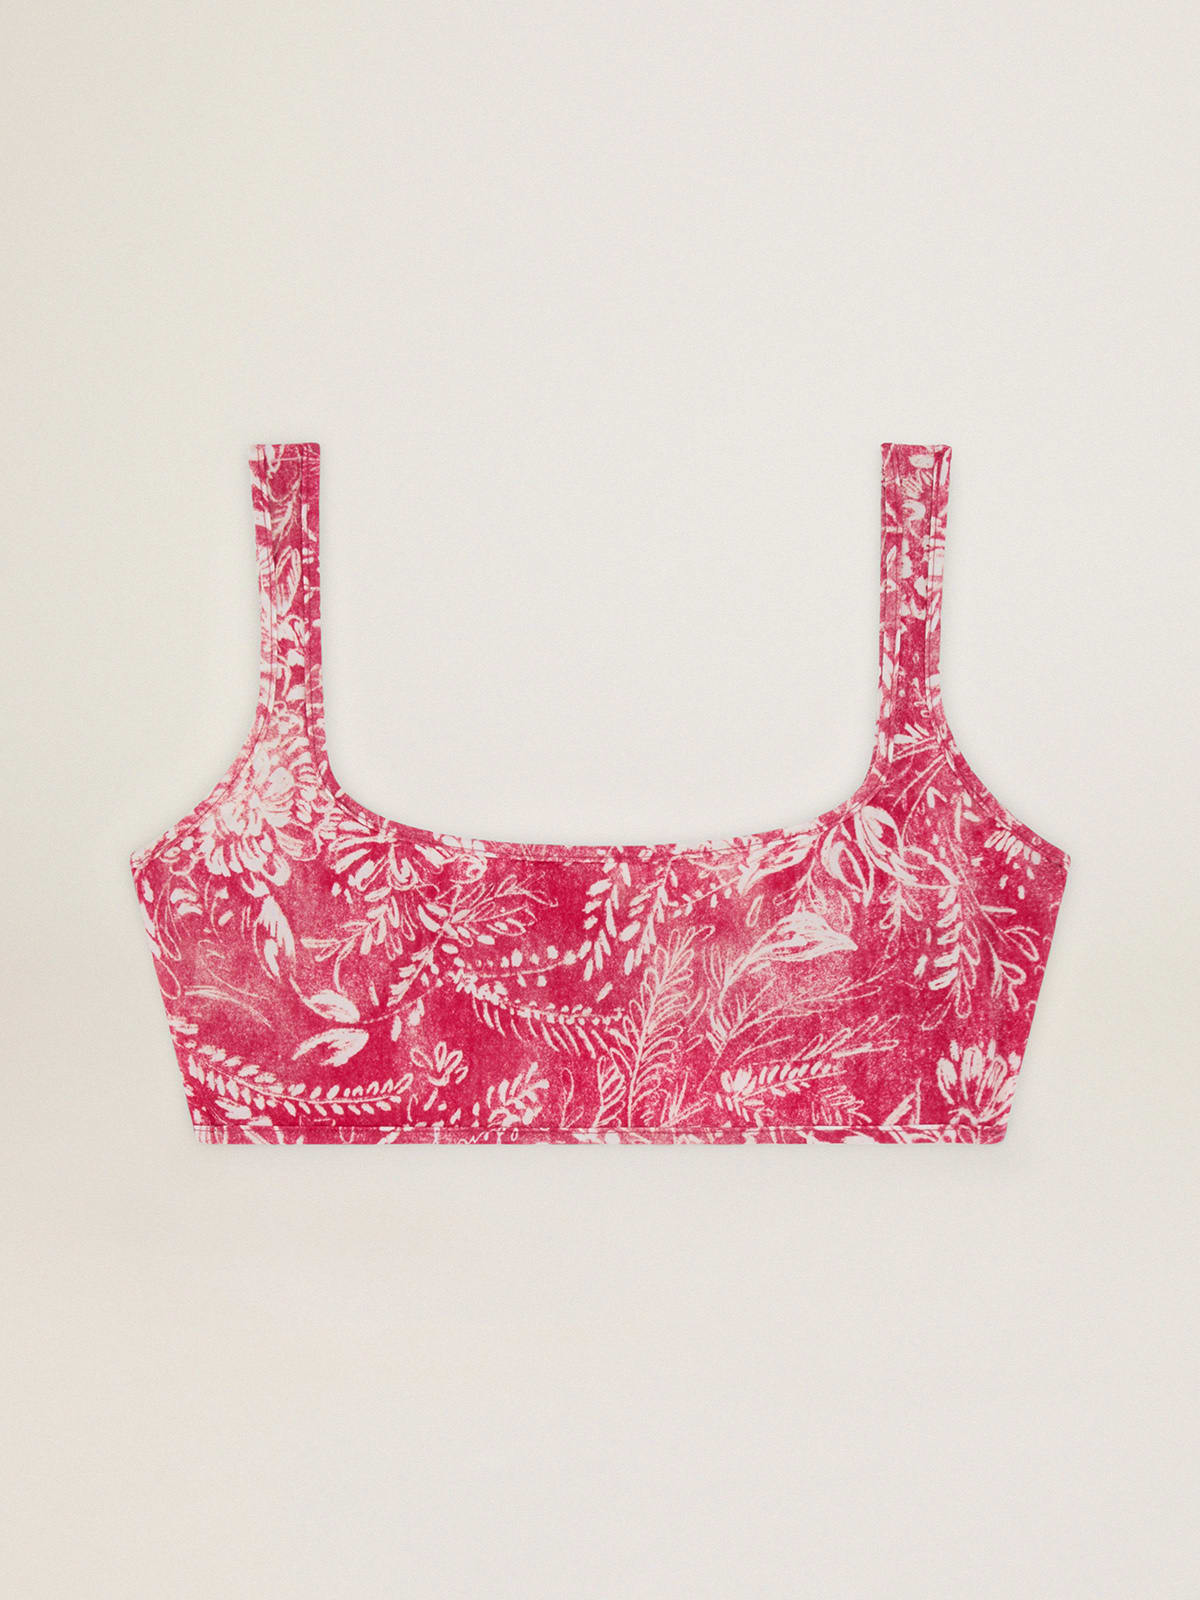 Vintage red bikini top with contrasting white print | Golden Goose